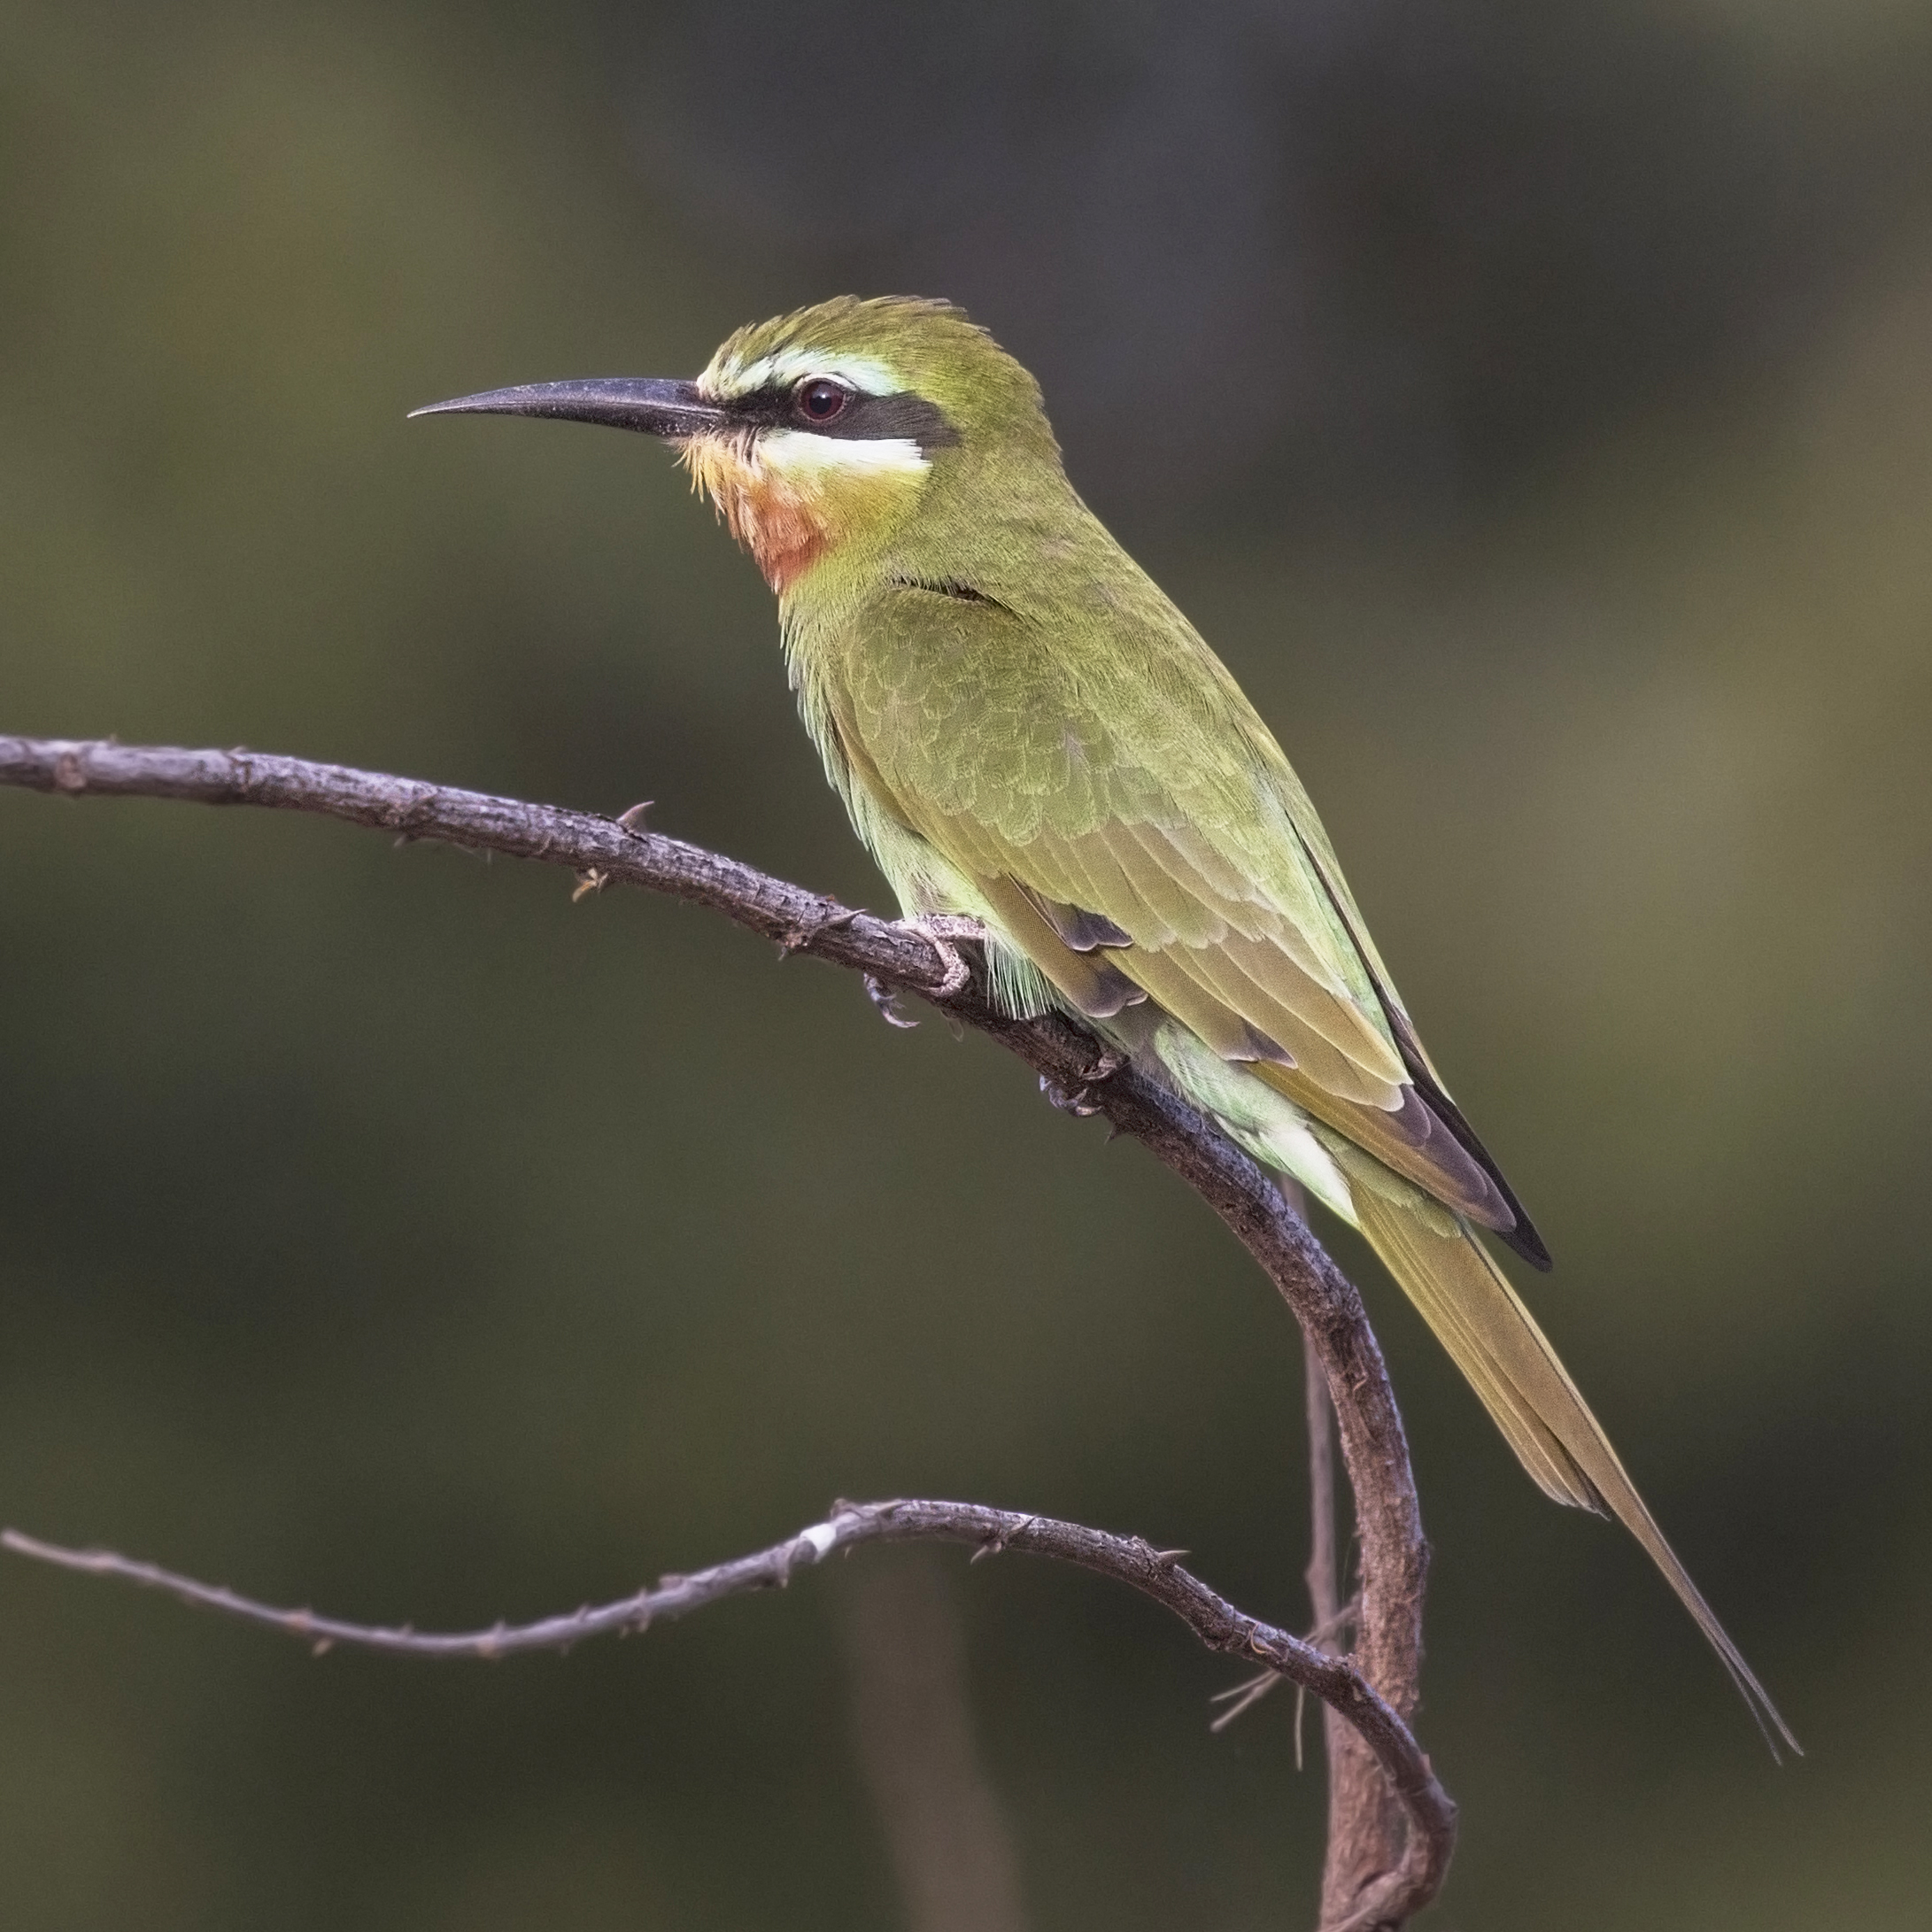 Blue-cheeked bee-eater (Merops persicus chrysocercus)